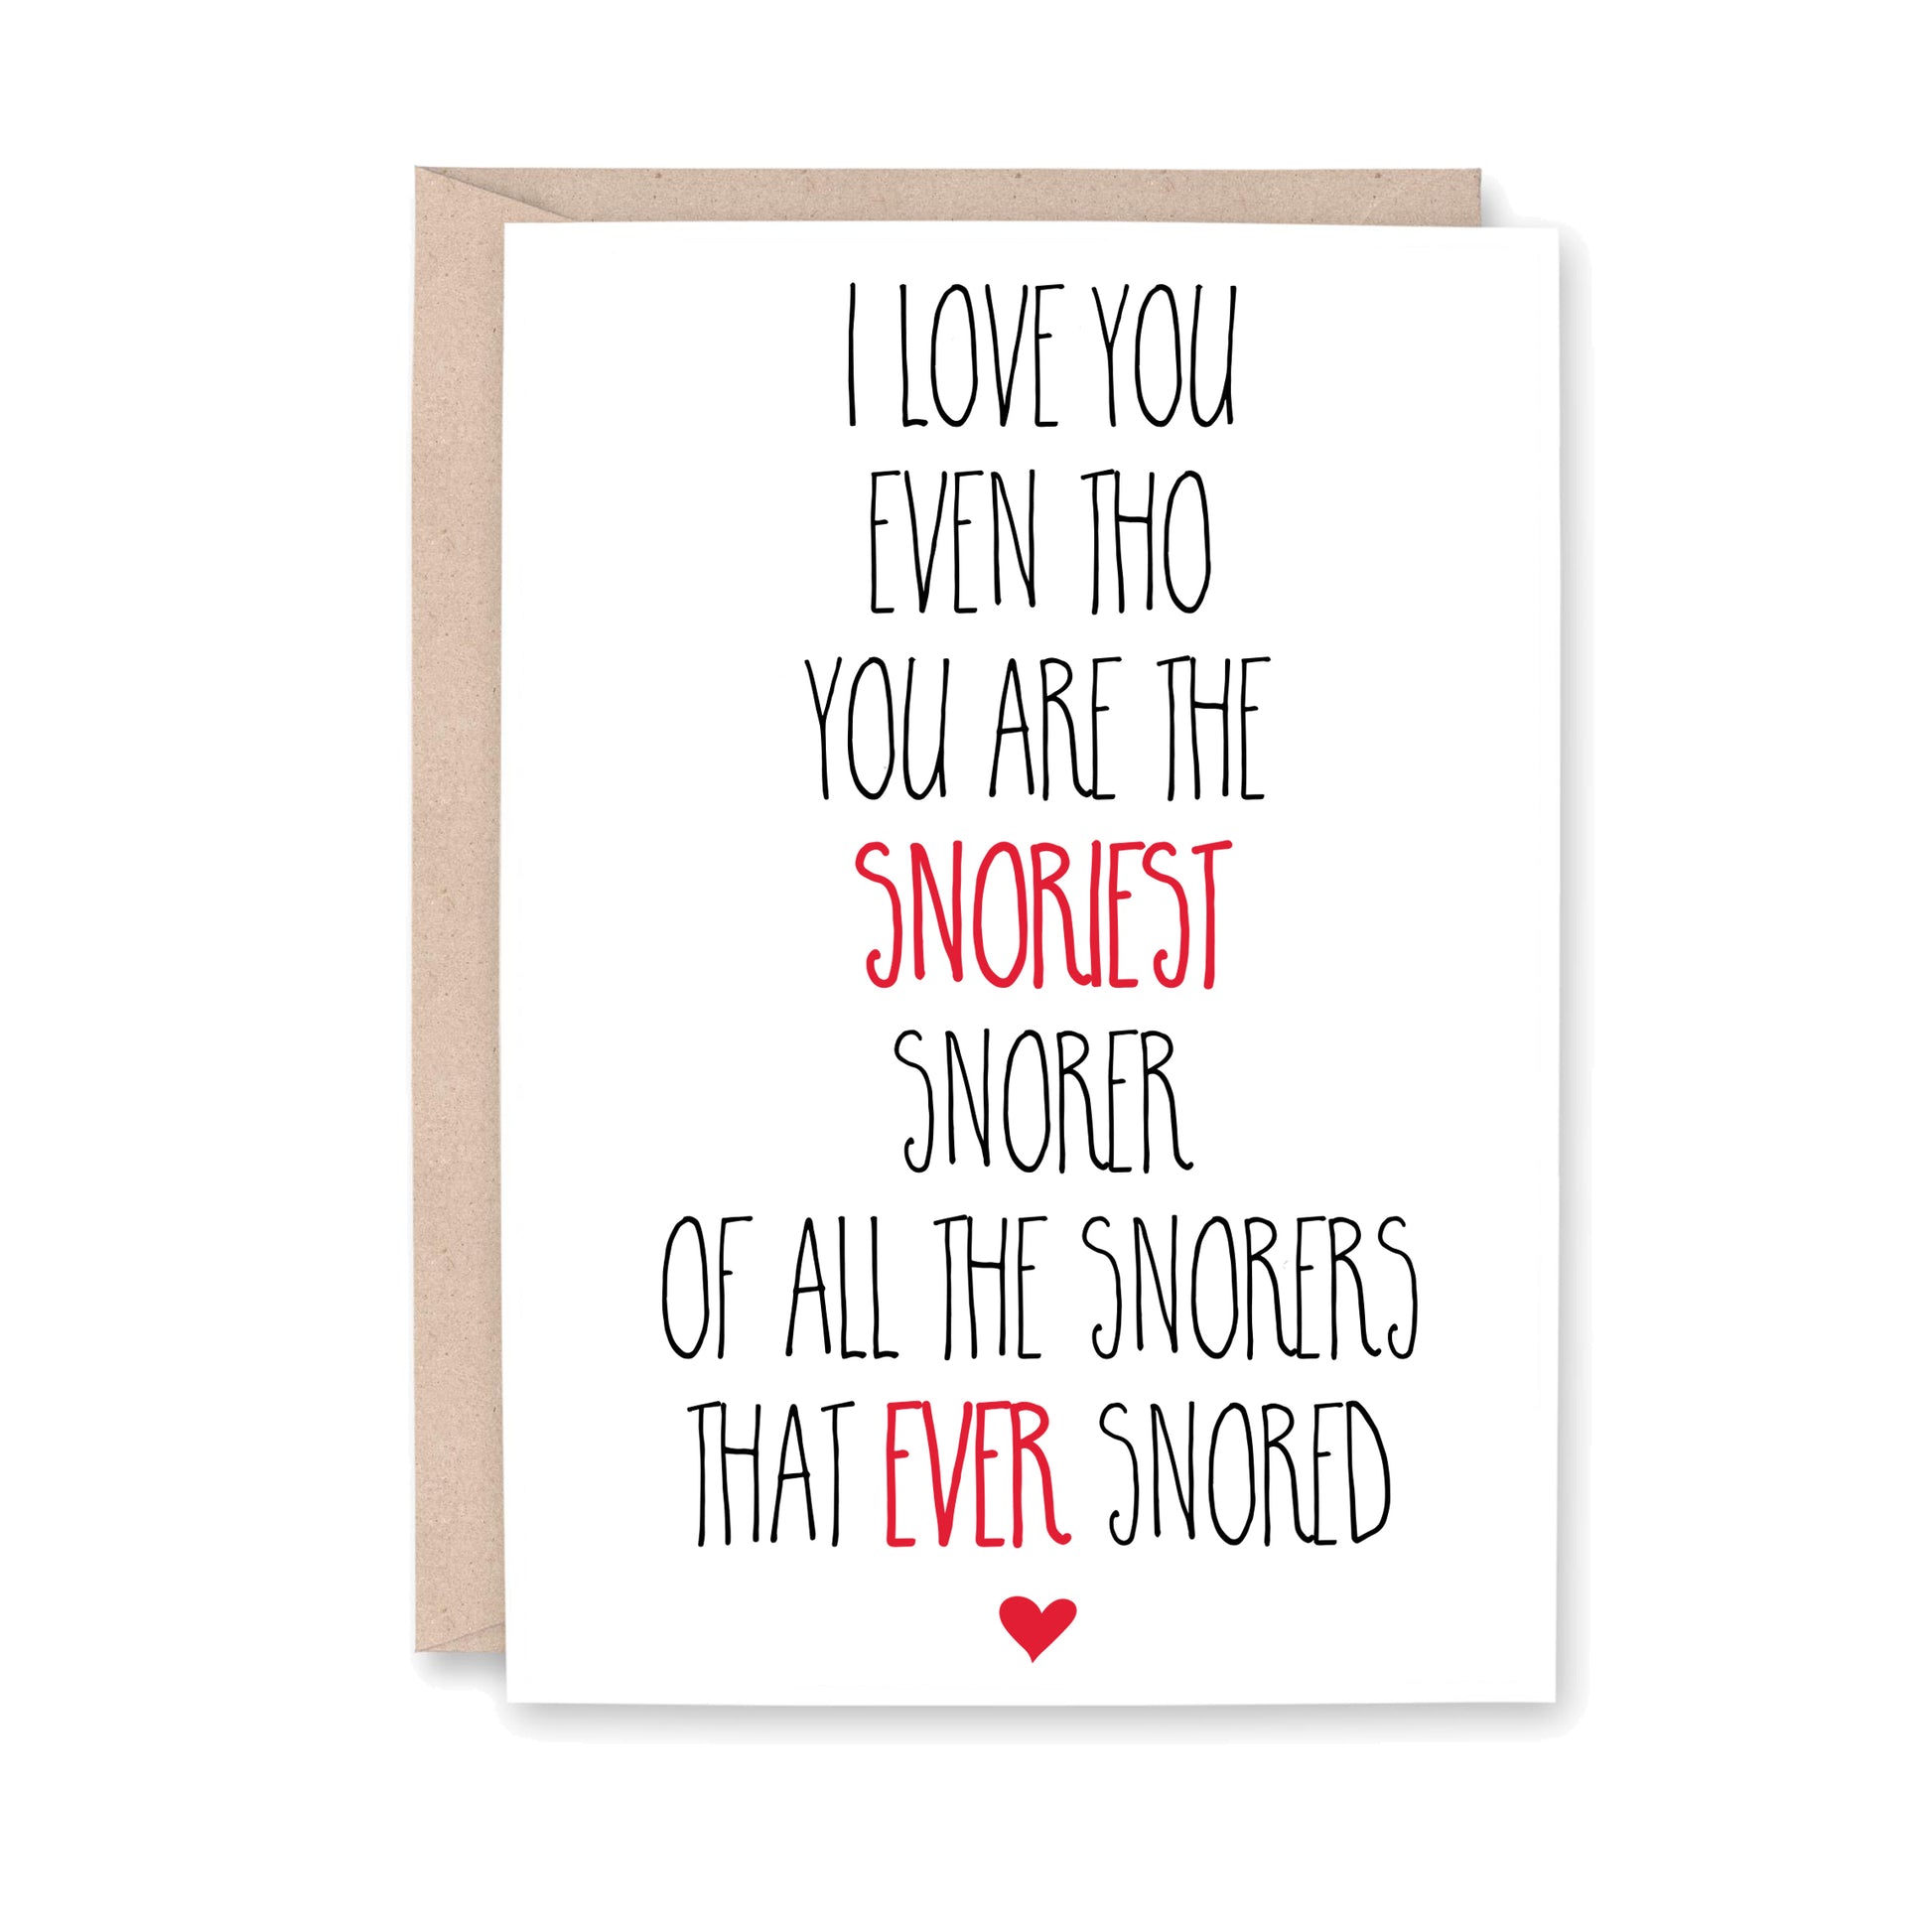 I love you even tho you are the SNORIEST Snorer of all the Snorers that EVER Snored